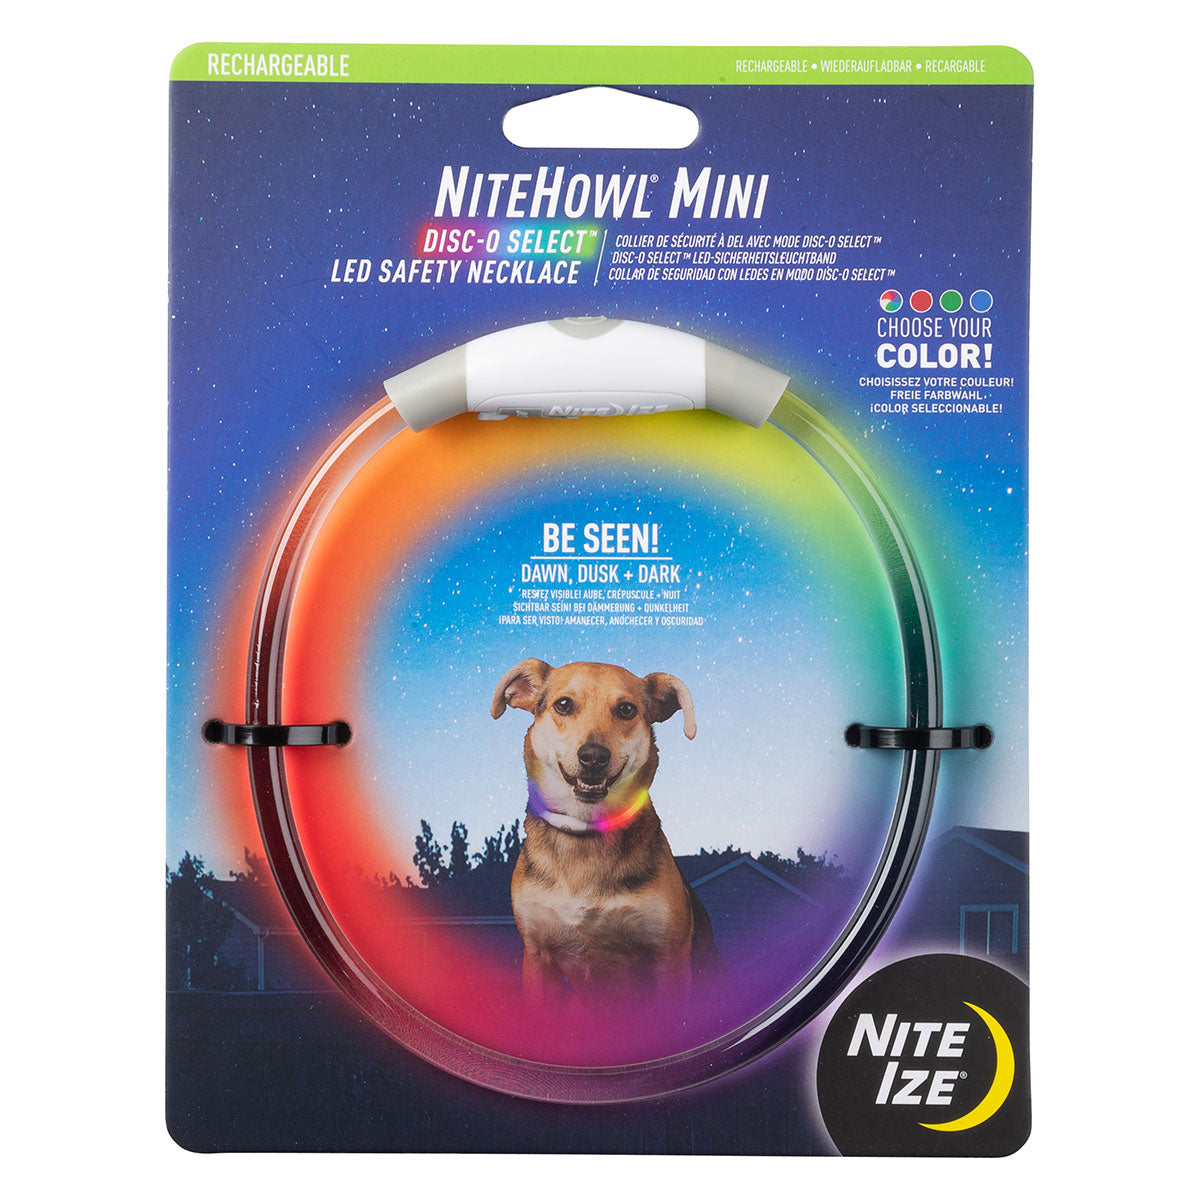 NiteHowl Mini Rechargeable LED Safety Necklace -  - Mansfield Hunting & Fishing - Products to prepare for Corona Virus